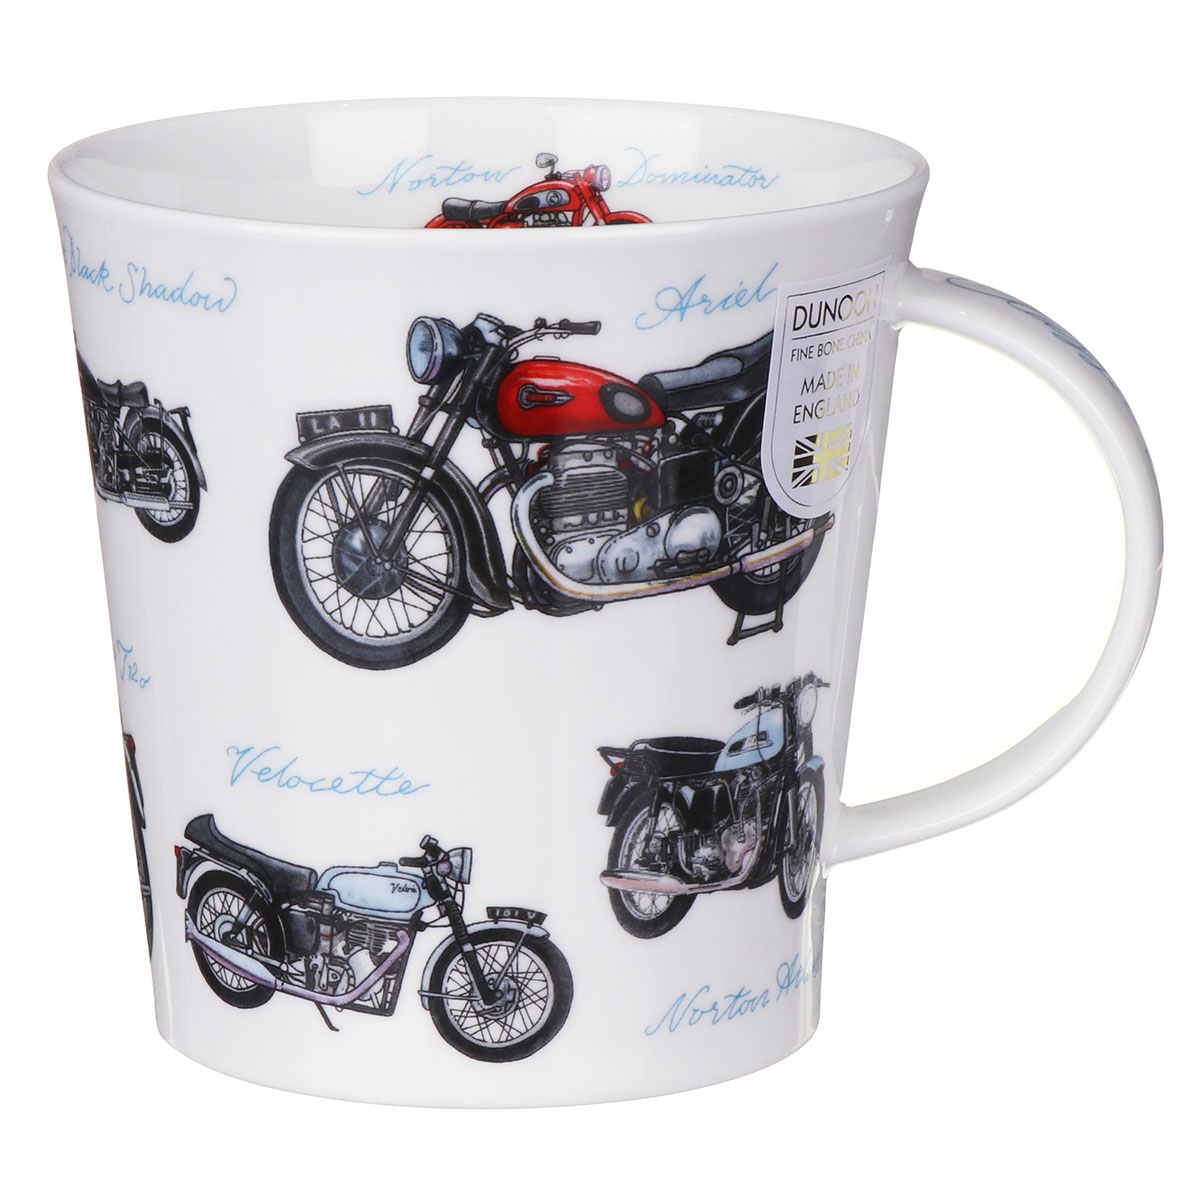 Cairngorm Classic collection motorbikes